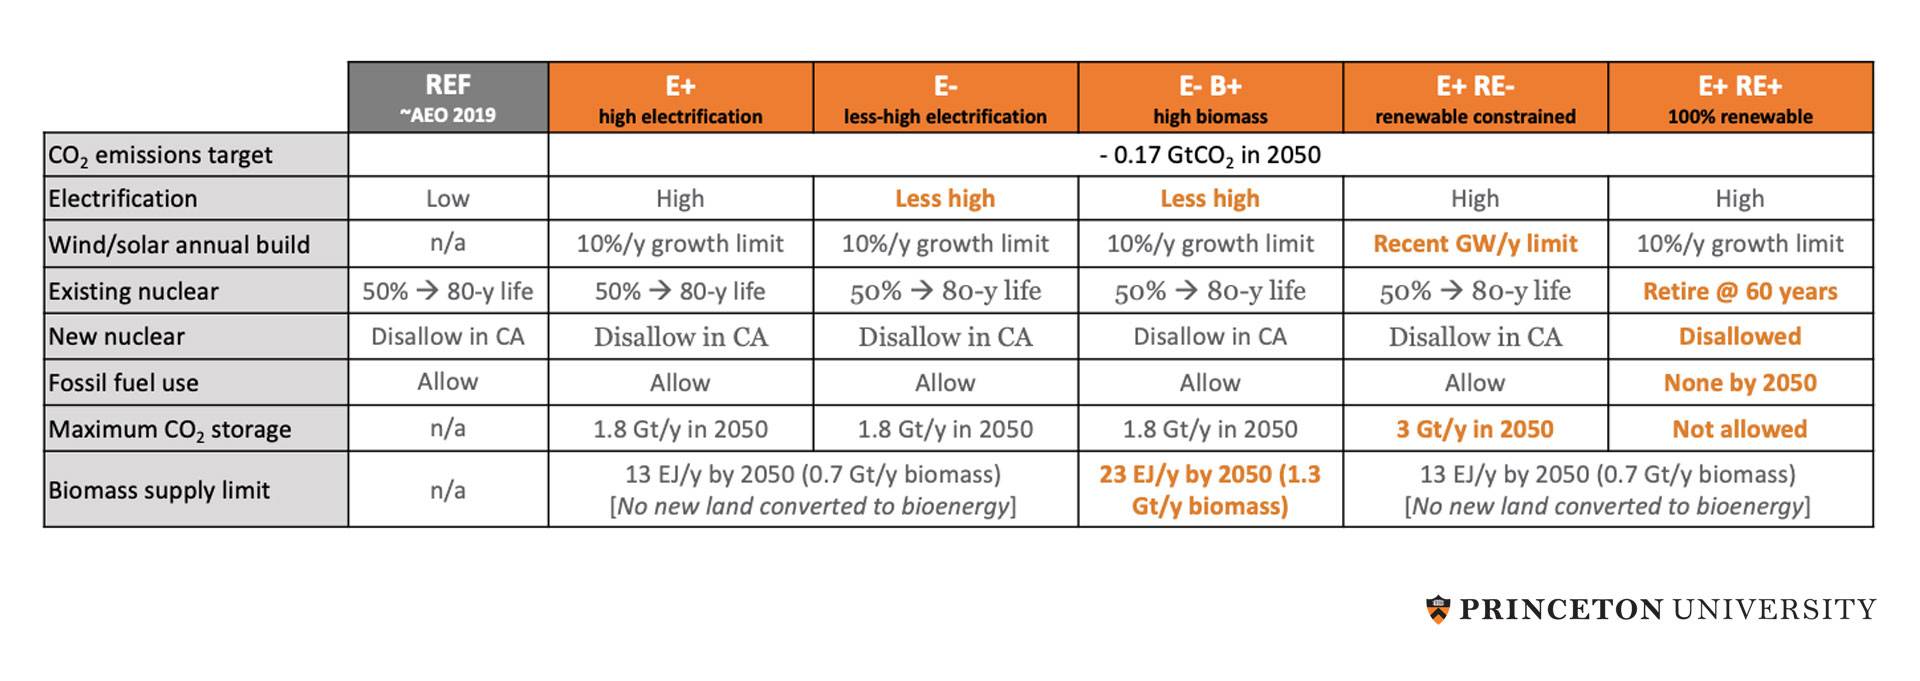 Chart comparing strategies of decarbonization. Co2 emissions target: REF ~AEO2019; E+, high electrification; E-, less high electrification; E-B+, high biomass: E+RE-, nenewable constrained; E+RE+, 100% renewable: -0.17 GtCO2 in 2050. Electrification: REF: low; E+: high; E-: Less high; E-B+: Less high; E+RE-: High; E+RE+: High. Wind/solar annual build: REF: n/a; E+: 10%/y growth limit; E-: 10%/y growth limit; E-B+: 10%/y growth limit; E+RE-: Recent GW/y limit;E+RE+: 10%/y growth limit. 50% arrow 80-y life: R